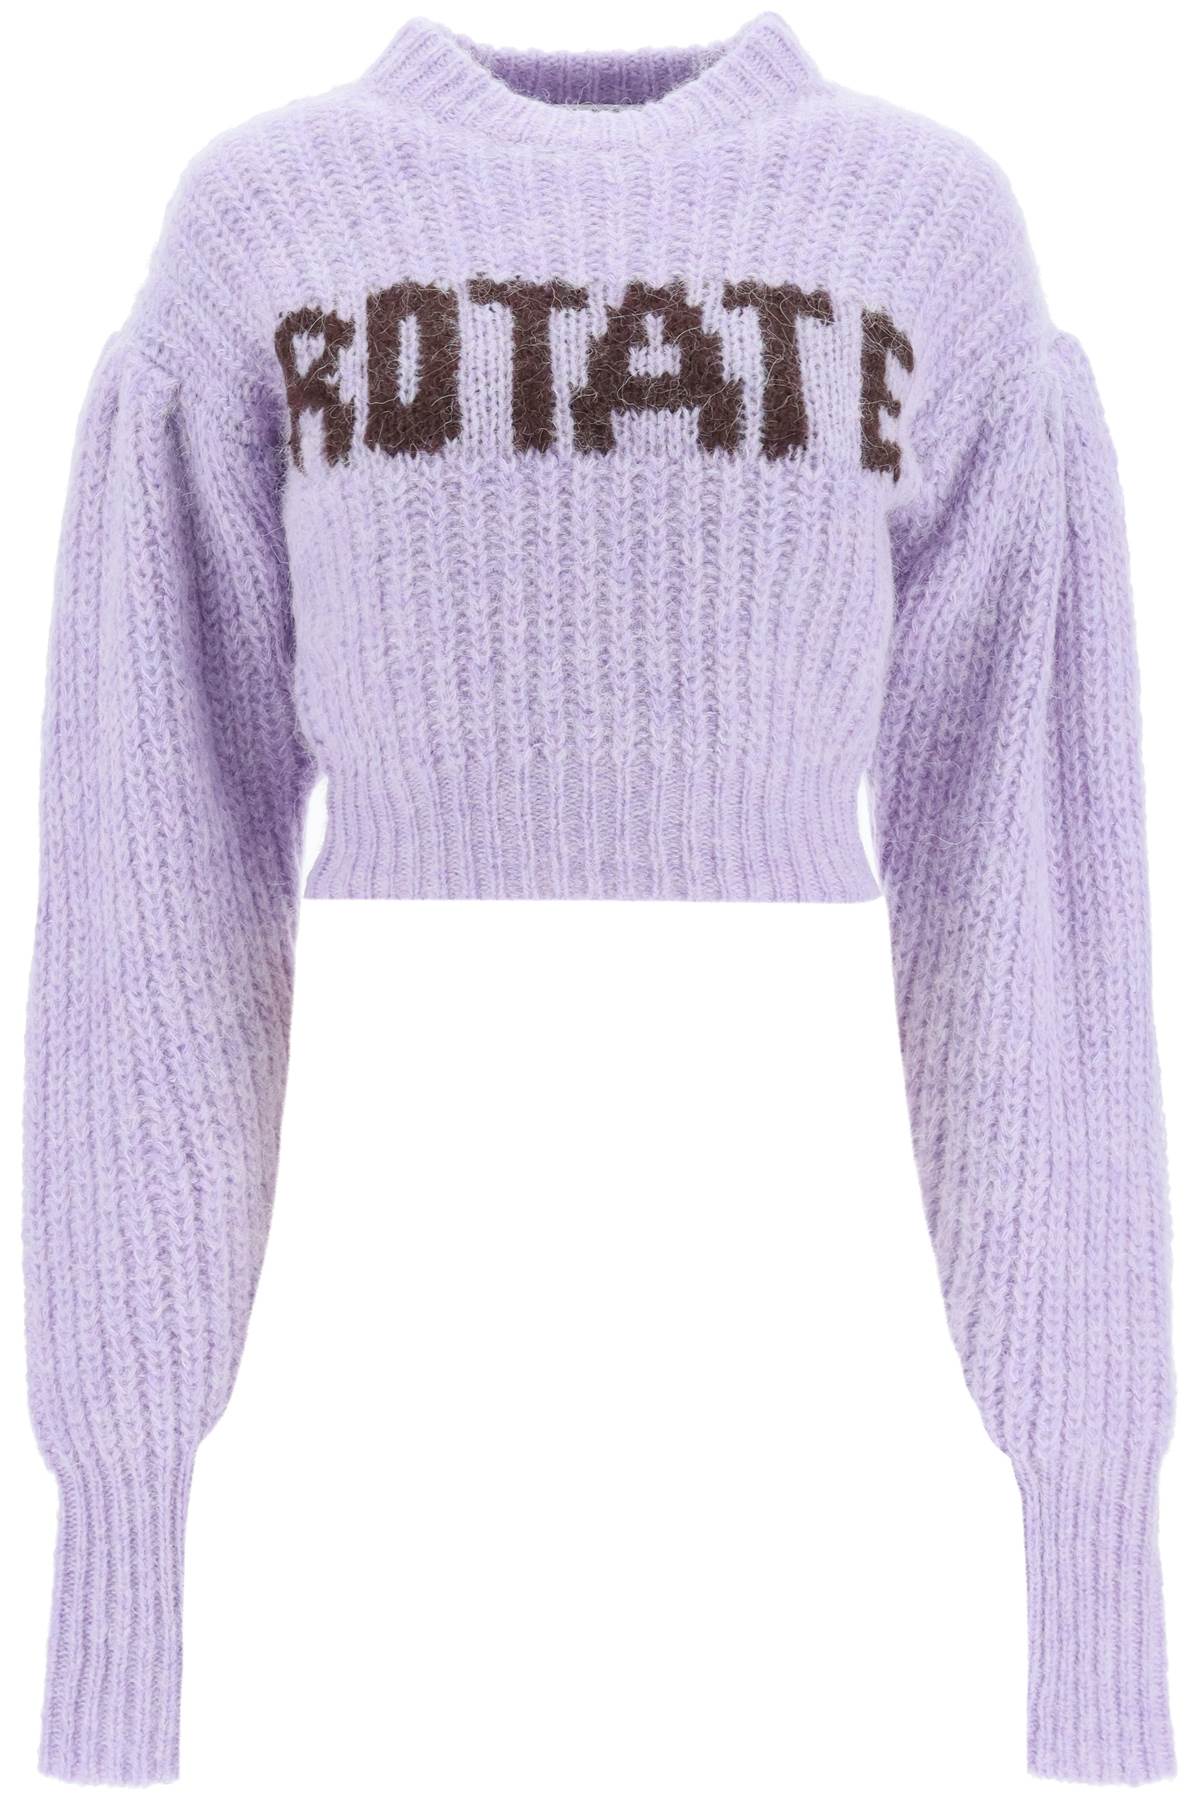 Rotate by Birger Christensen adley Cropped Sweater